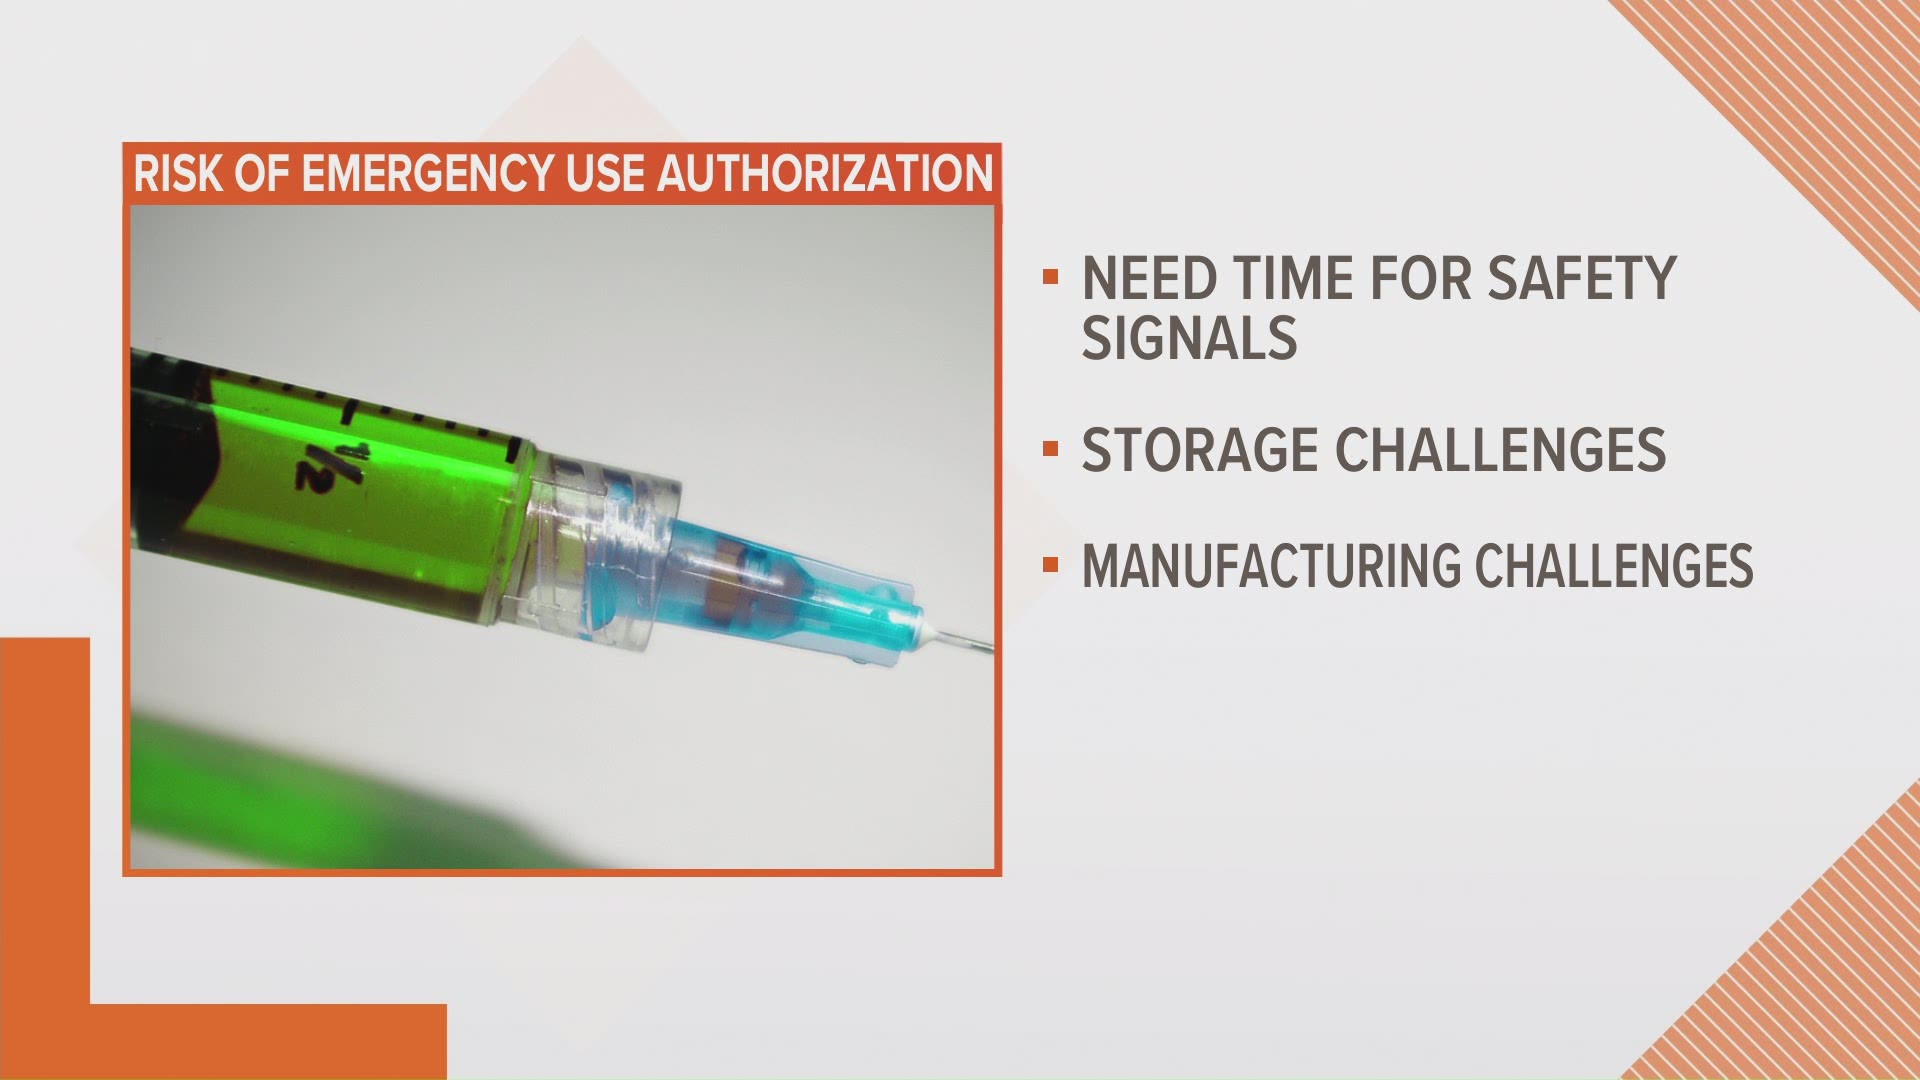 As we wait for a COVID-19 vaccine, the FDA says one could be approved for emergency use by the end of the year.